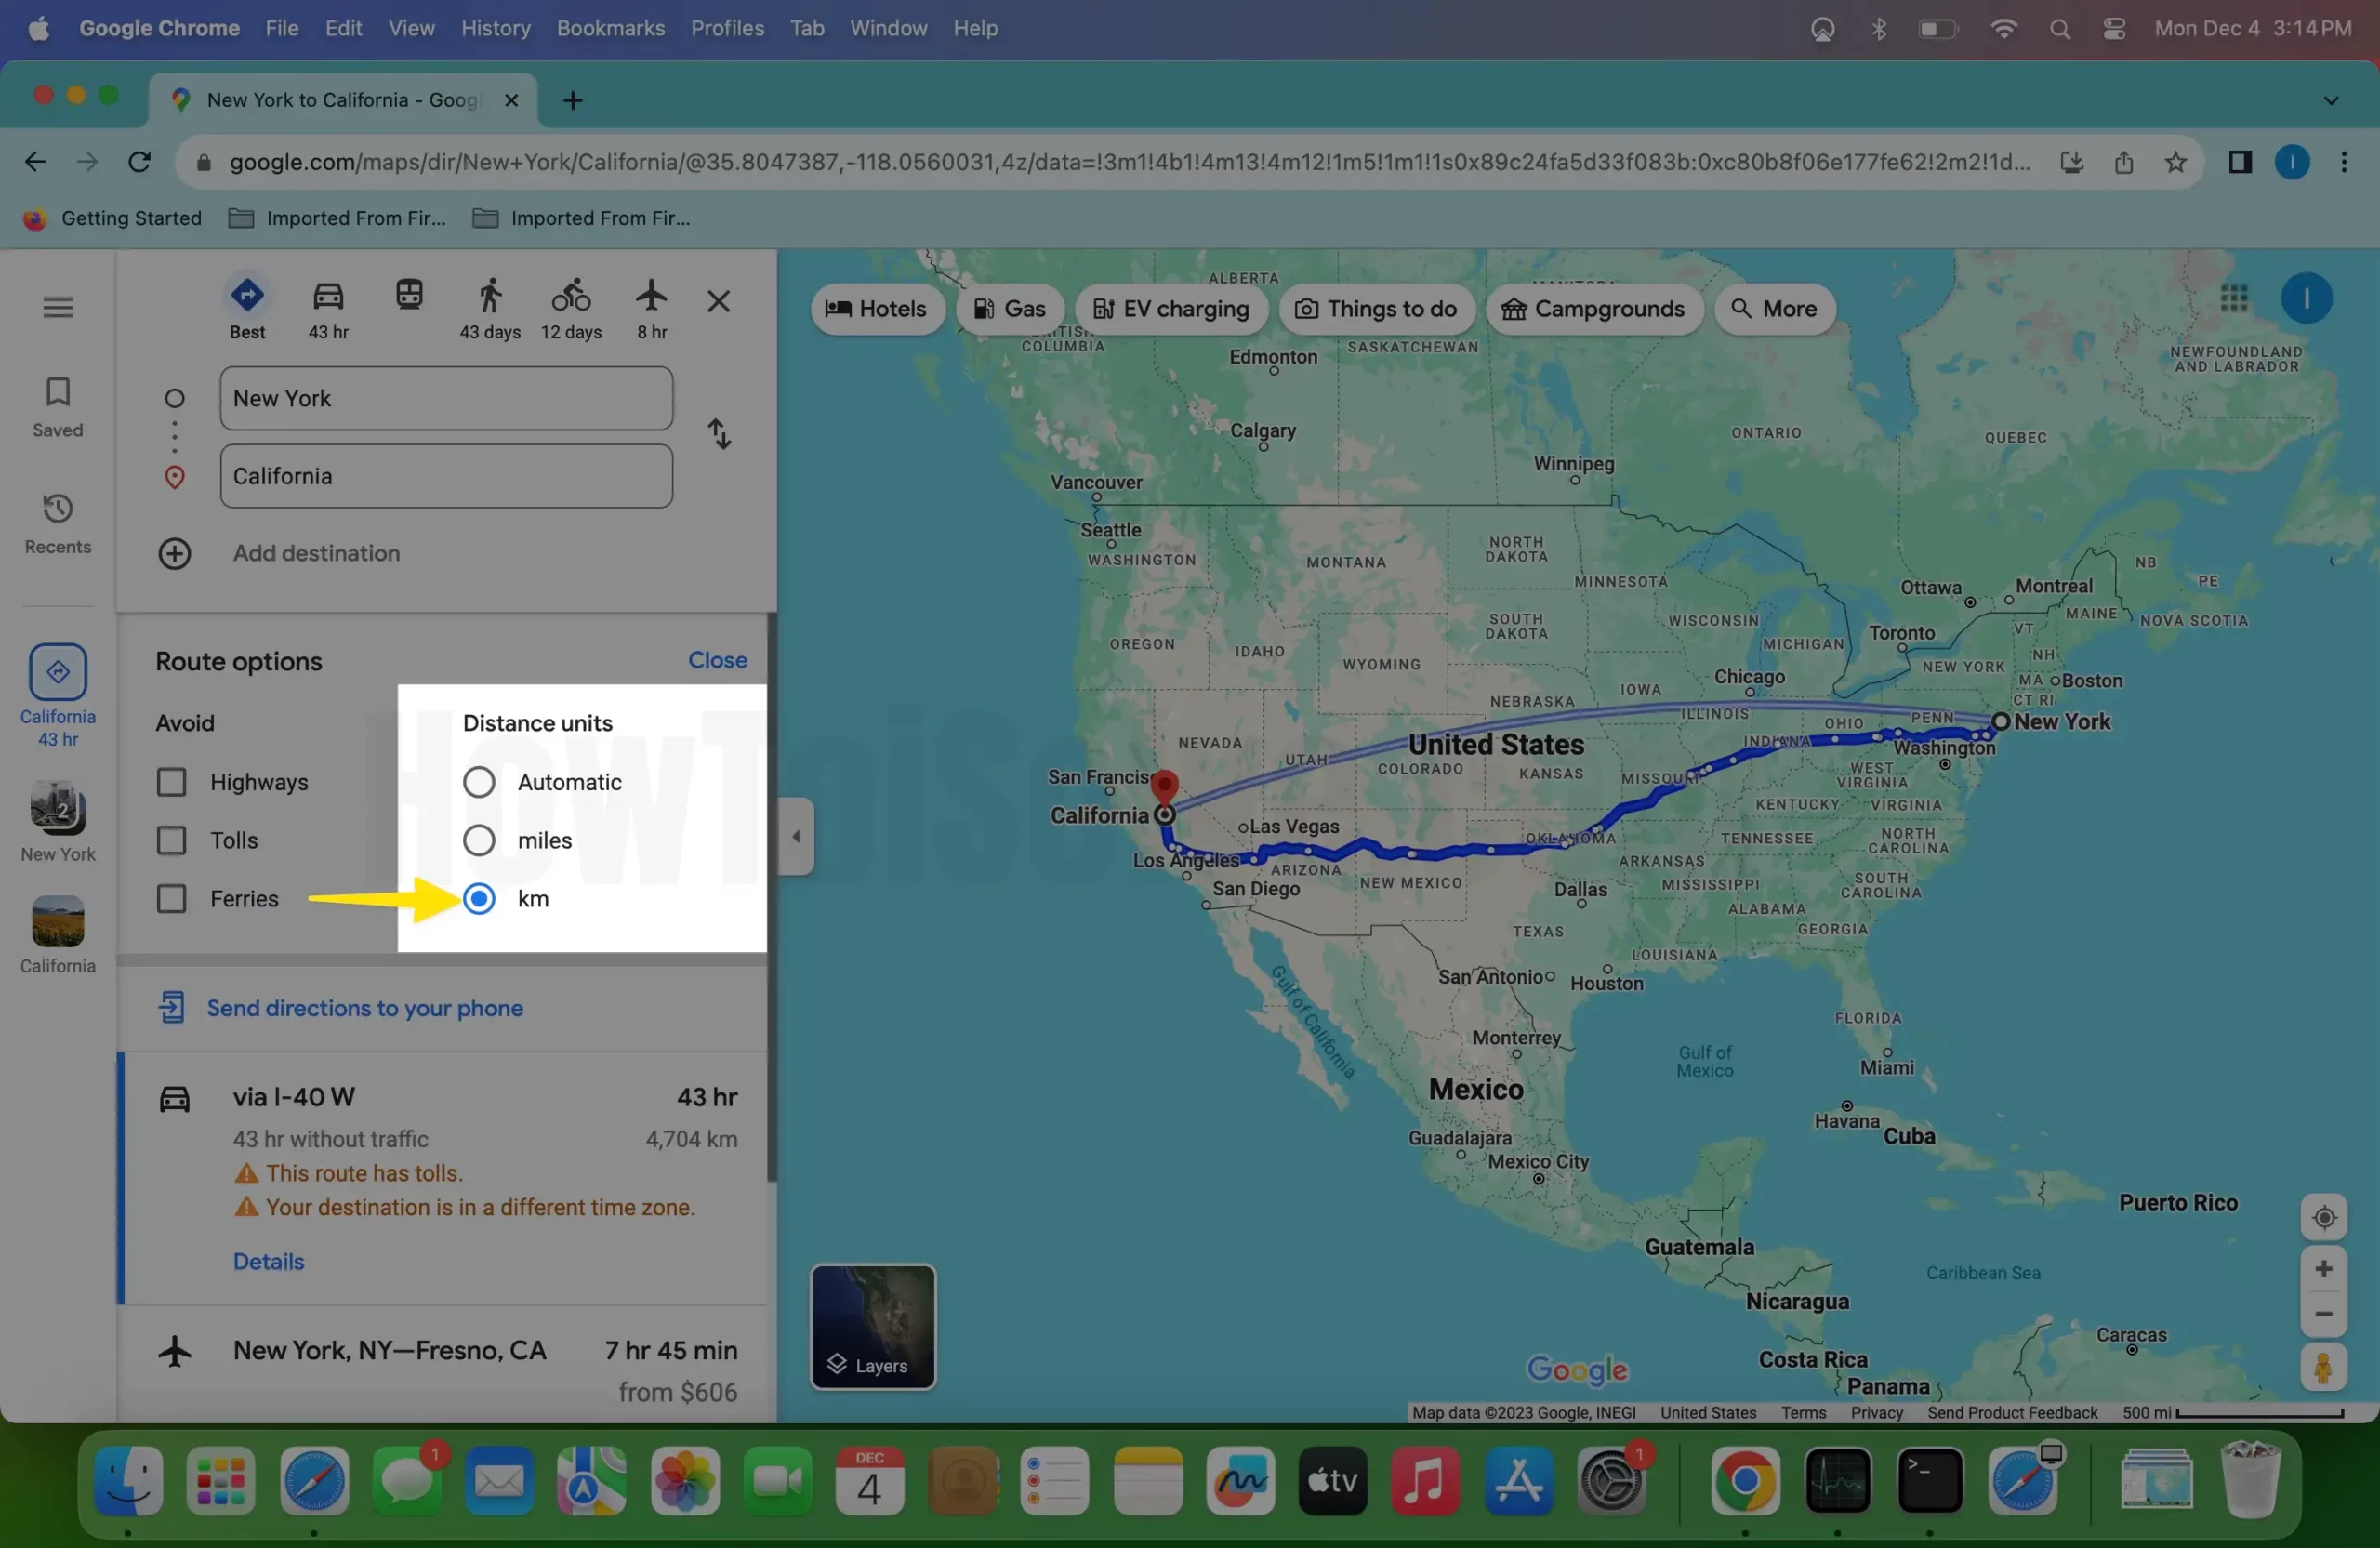 Switch Between Miles to KM in Google Map on Mac